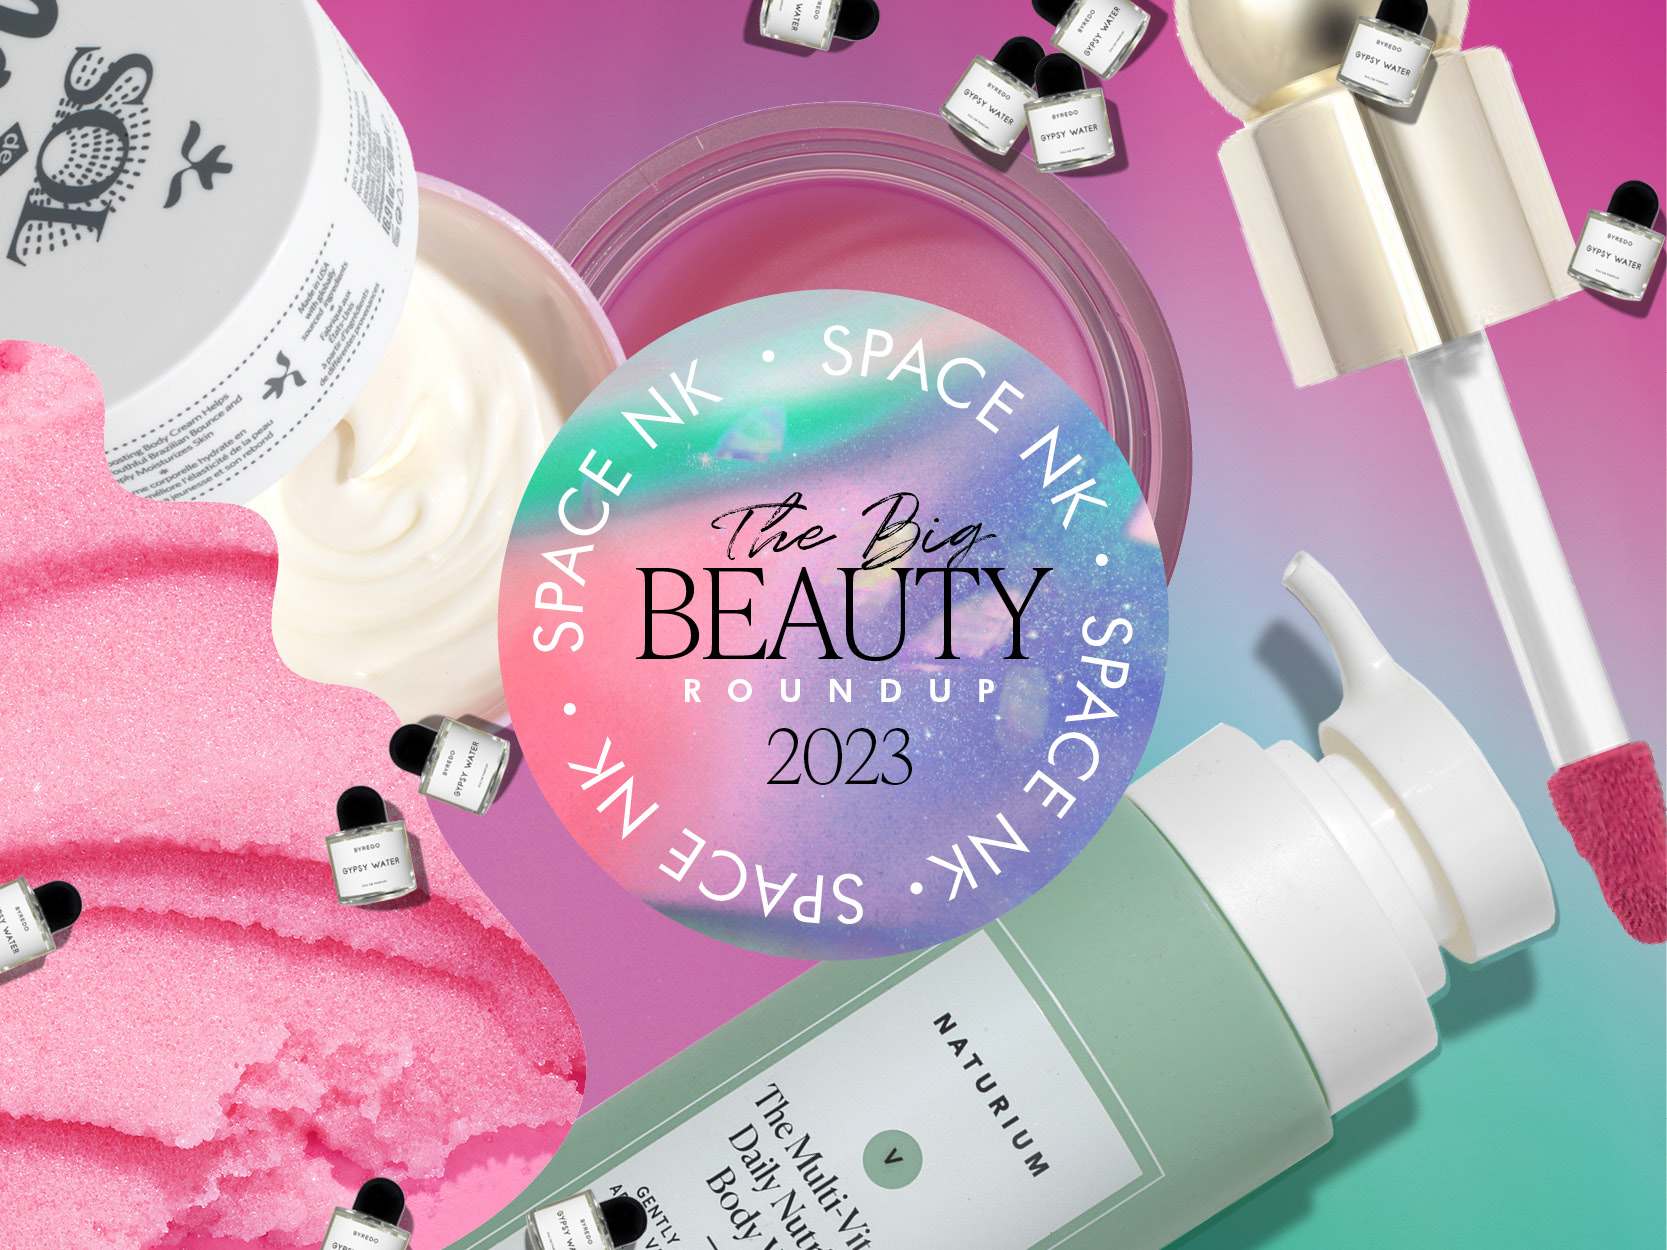 Space NK's Big Beauty Roundup 2023